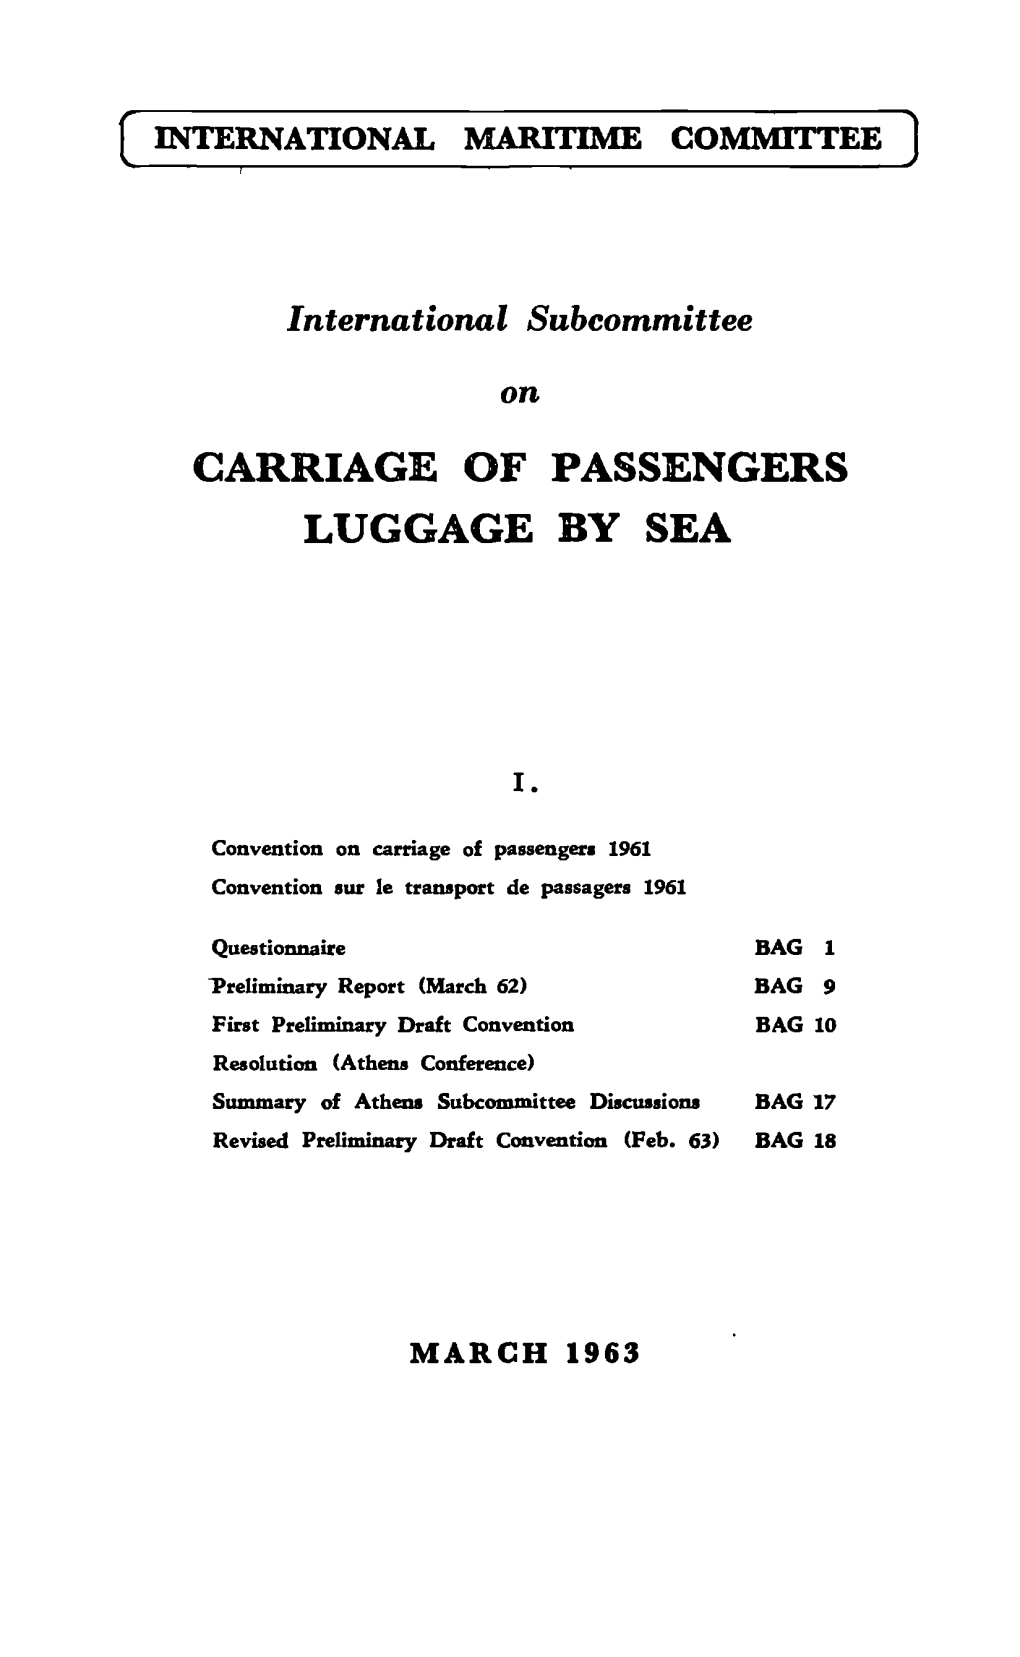 1963 CARRIAGE of PASSENGERS 1 .Pdf 337.23 KB